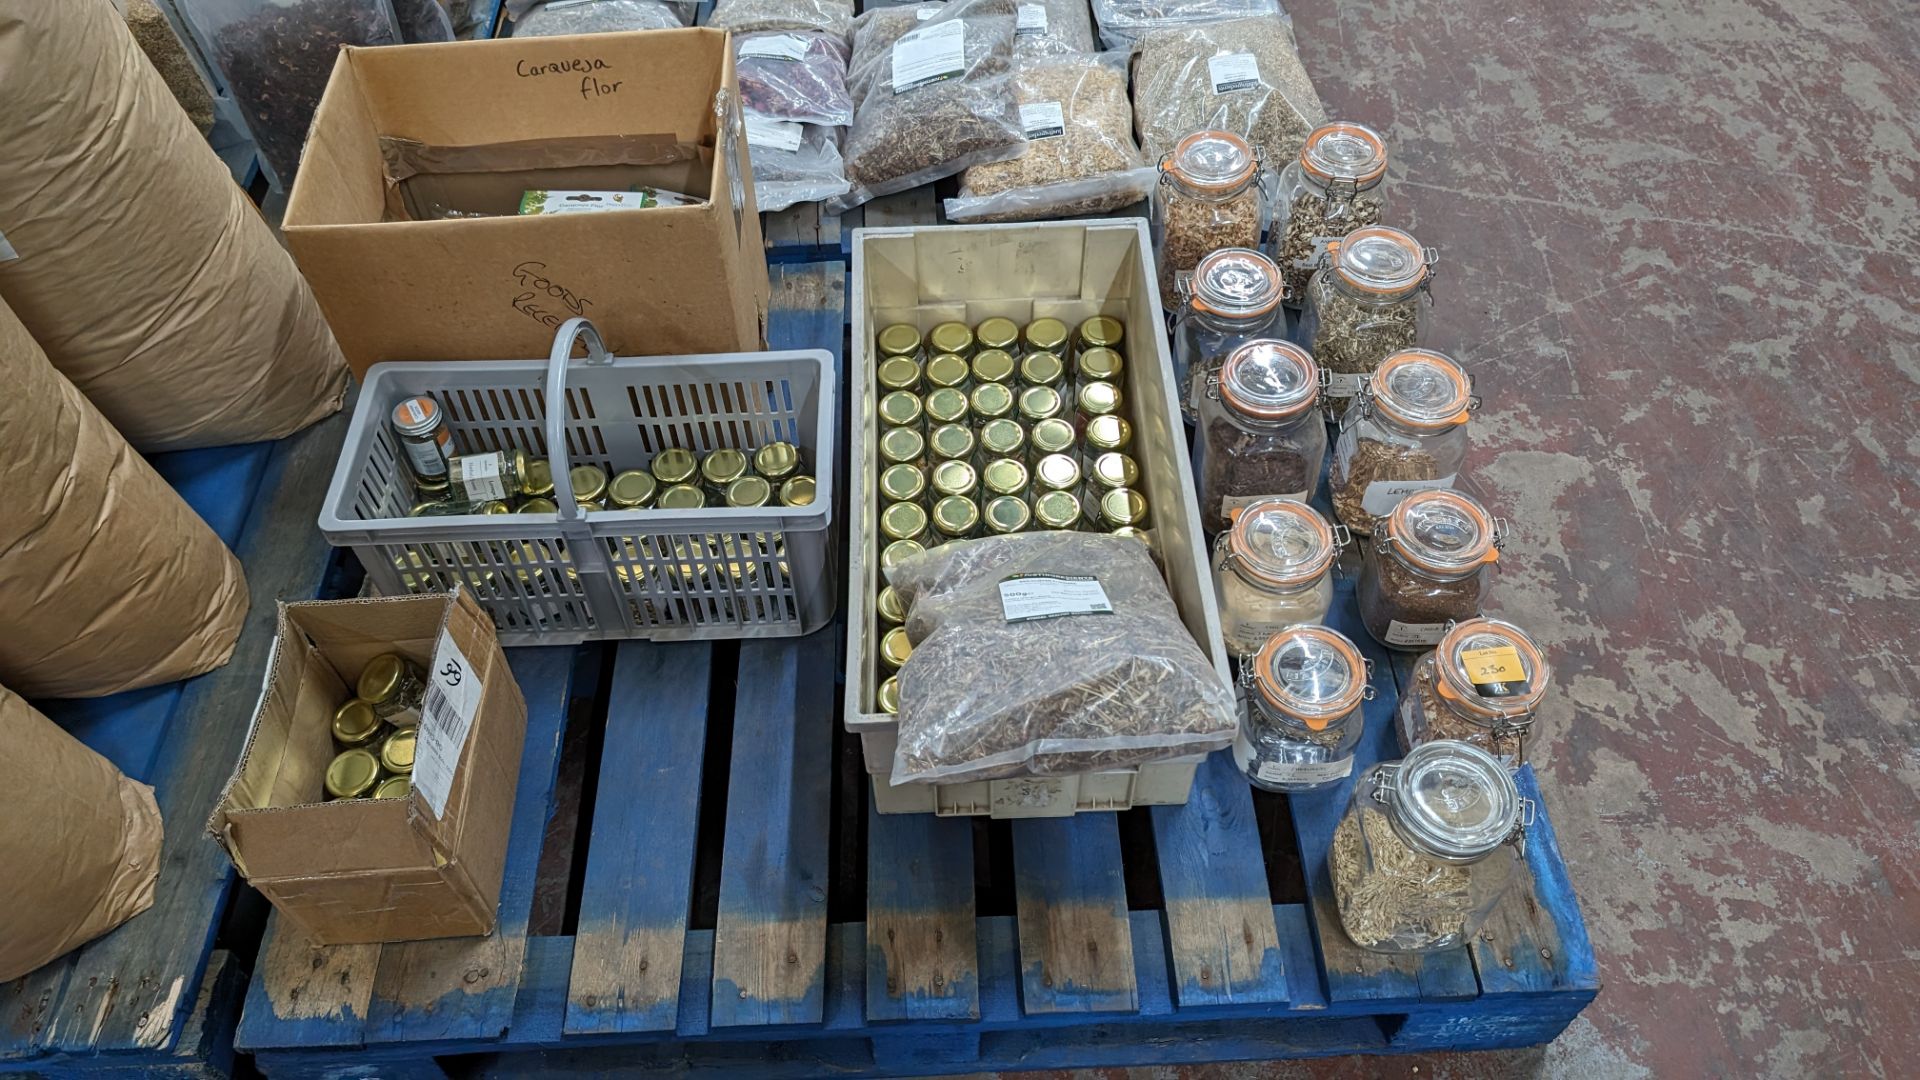 The contents of a pallet of assorted herbs, spices, aromats and more, including all the small glass